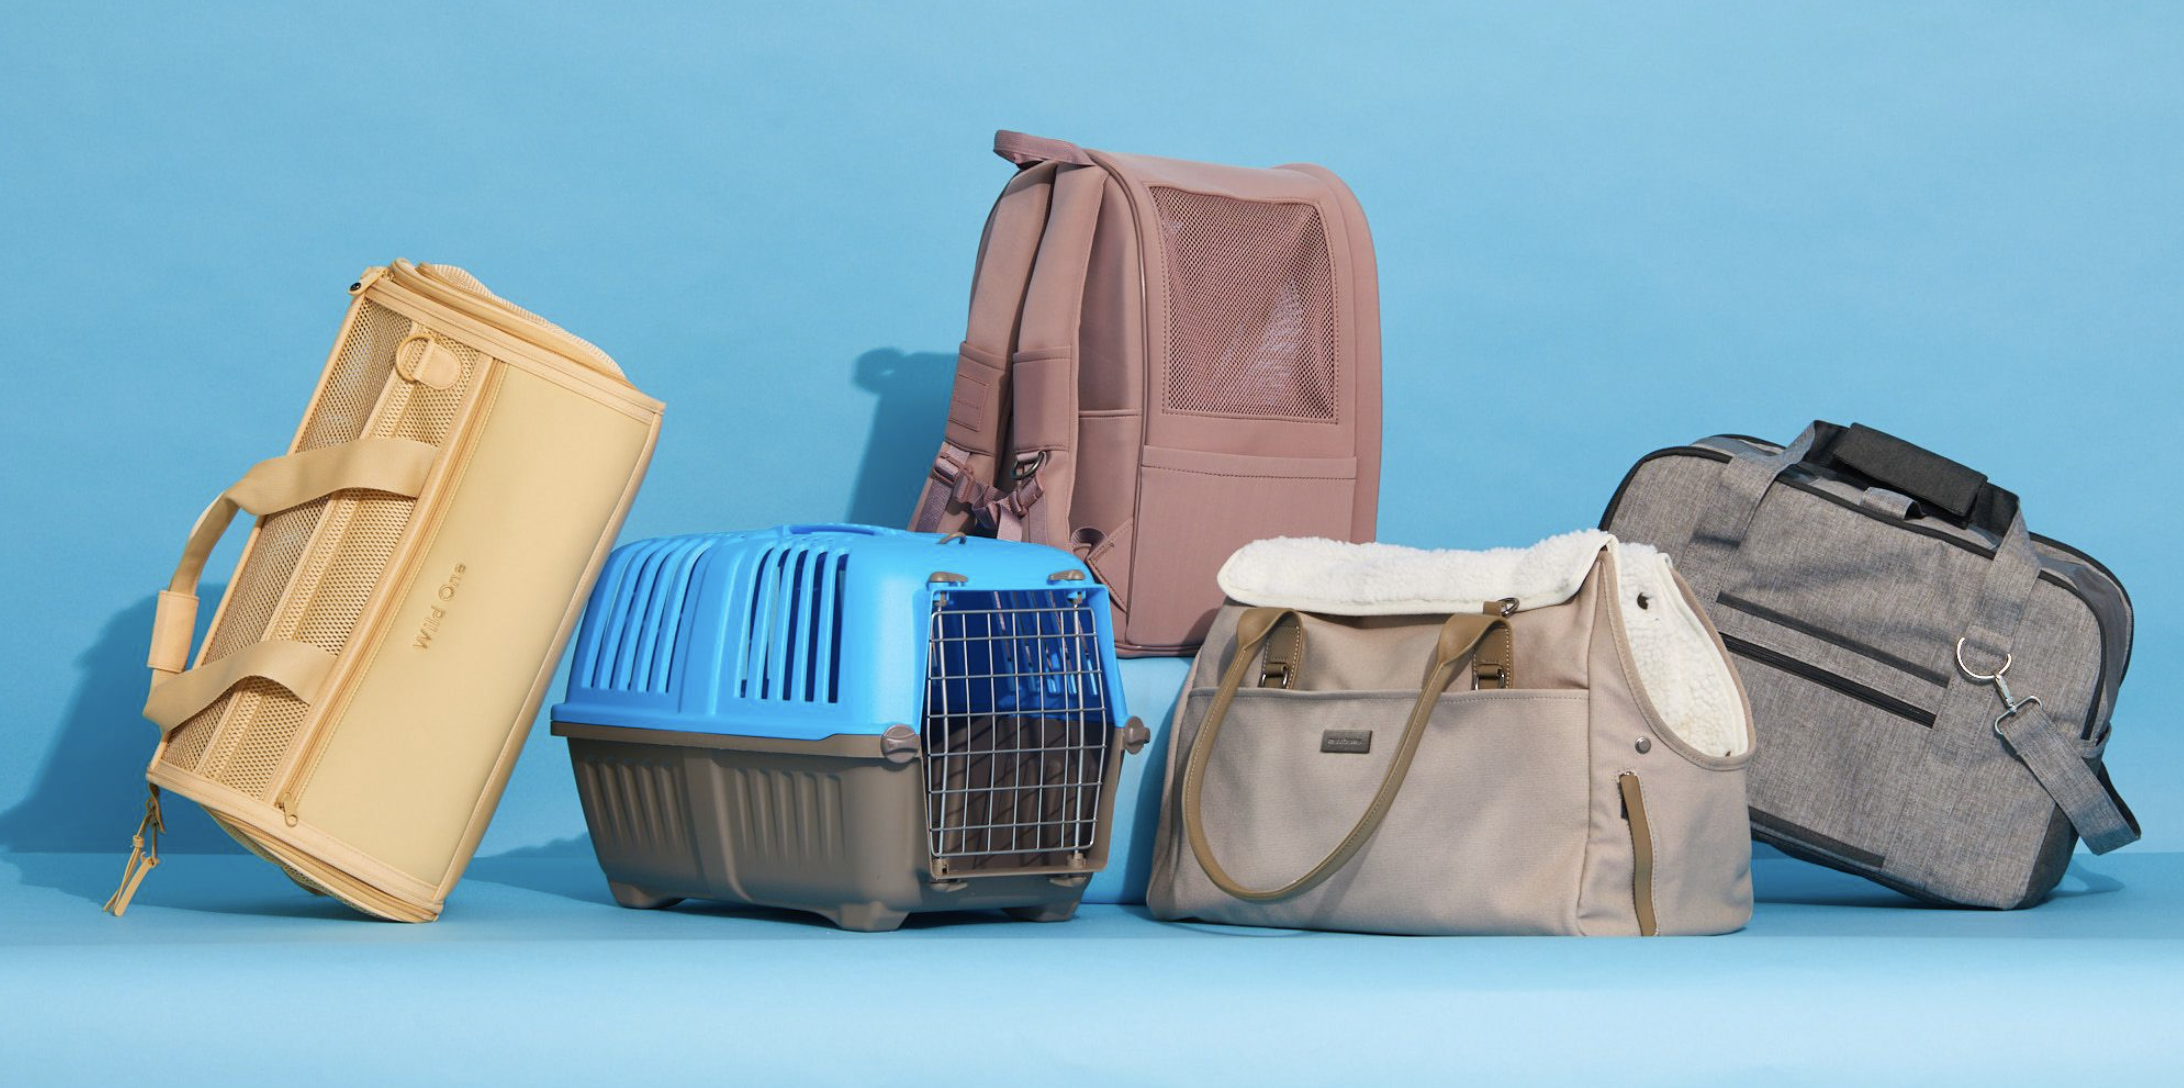 Away Pet Carrier Review - Reviewed